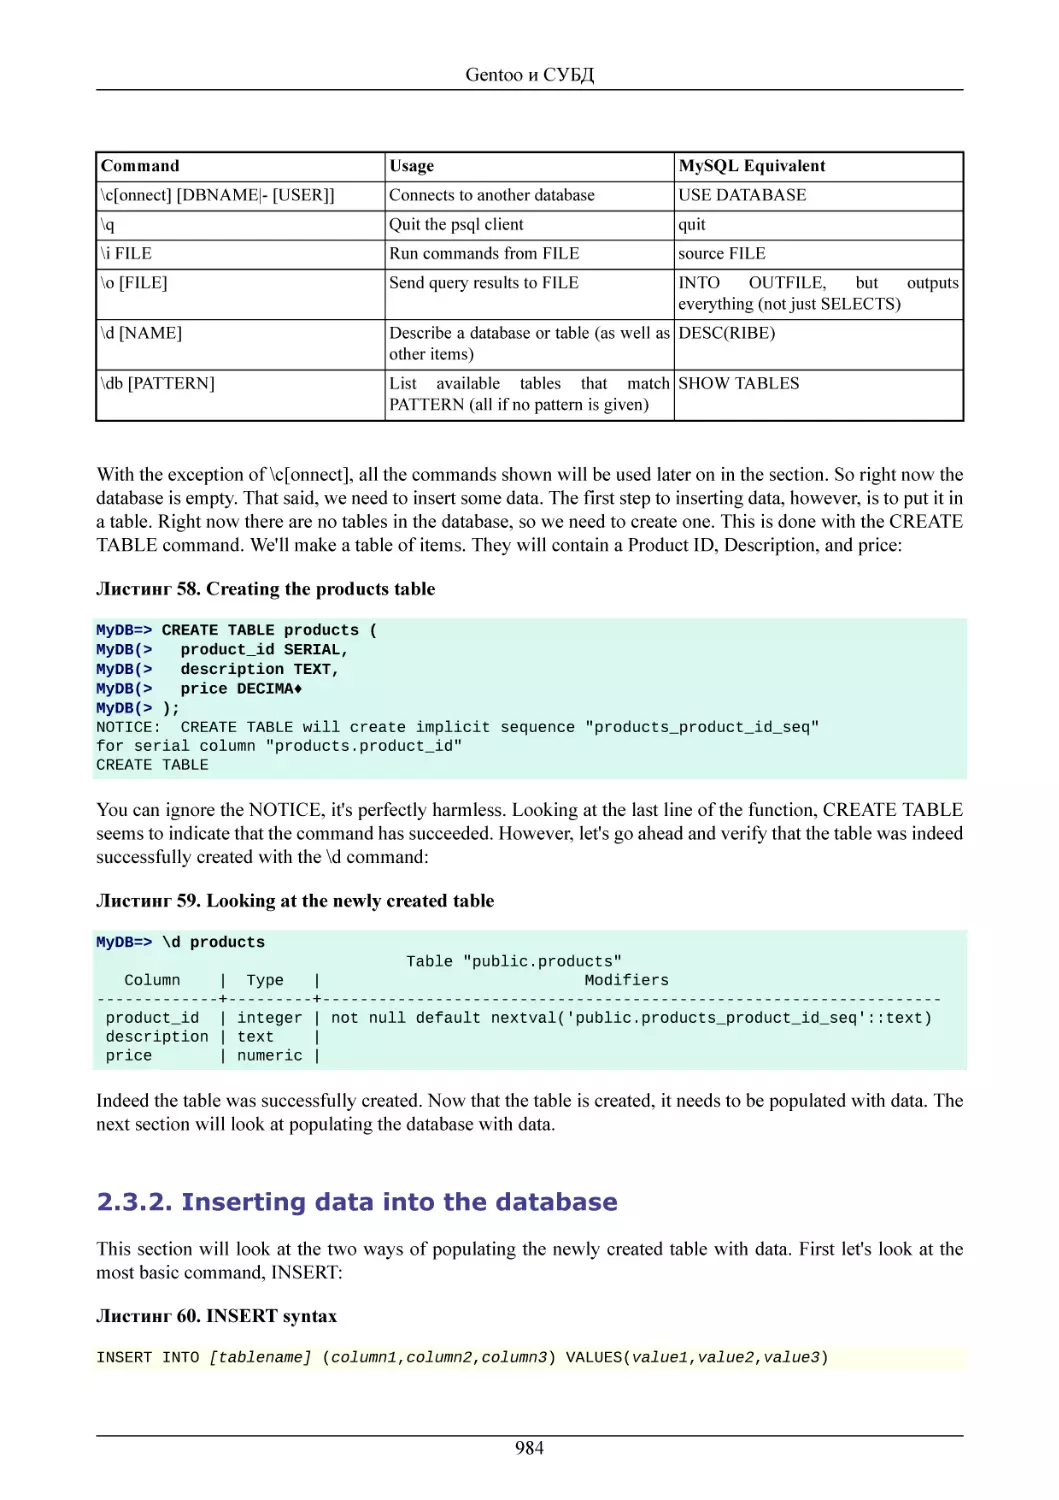 Inserting data into the database